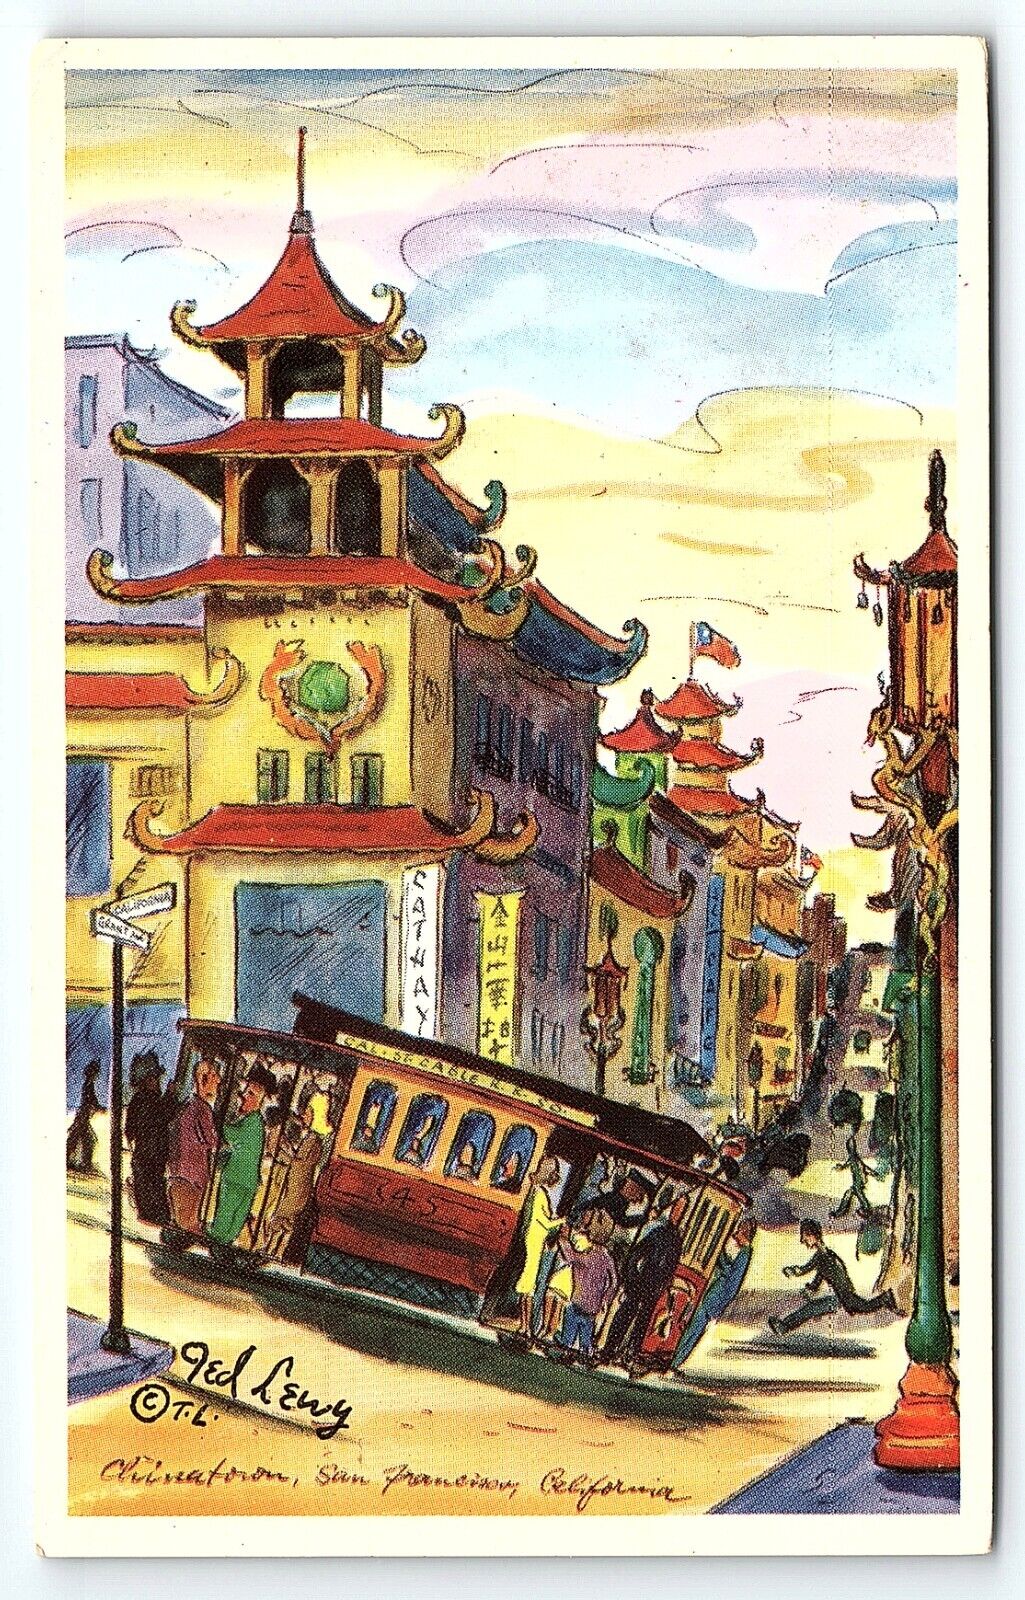 1953 CHINATOWN  SAN FRANCISCO CA CABLE CAR TED LEWY ARTIST POSTCARD P3249